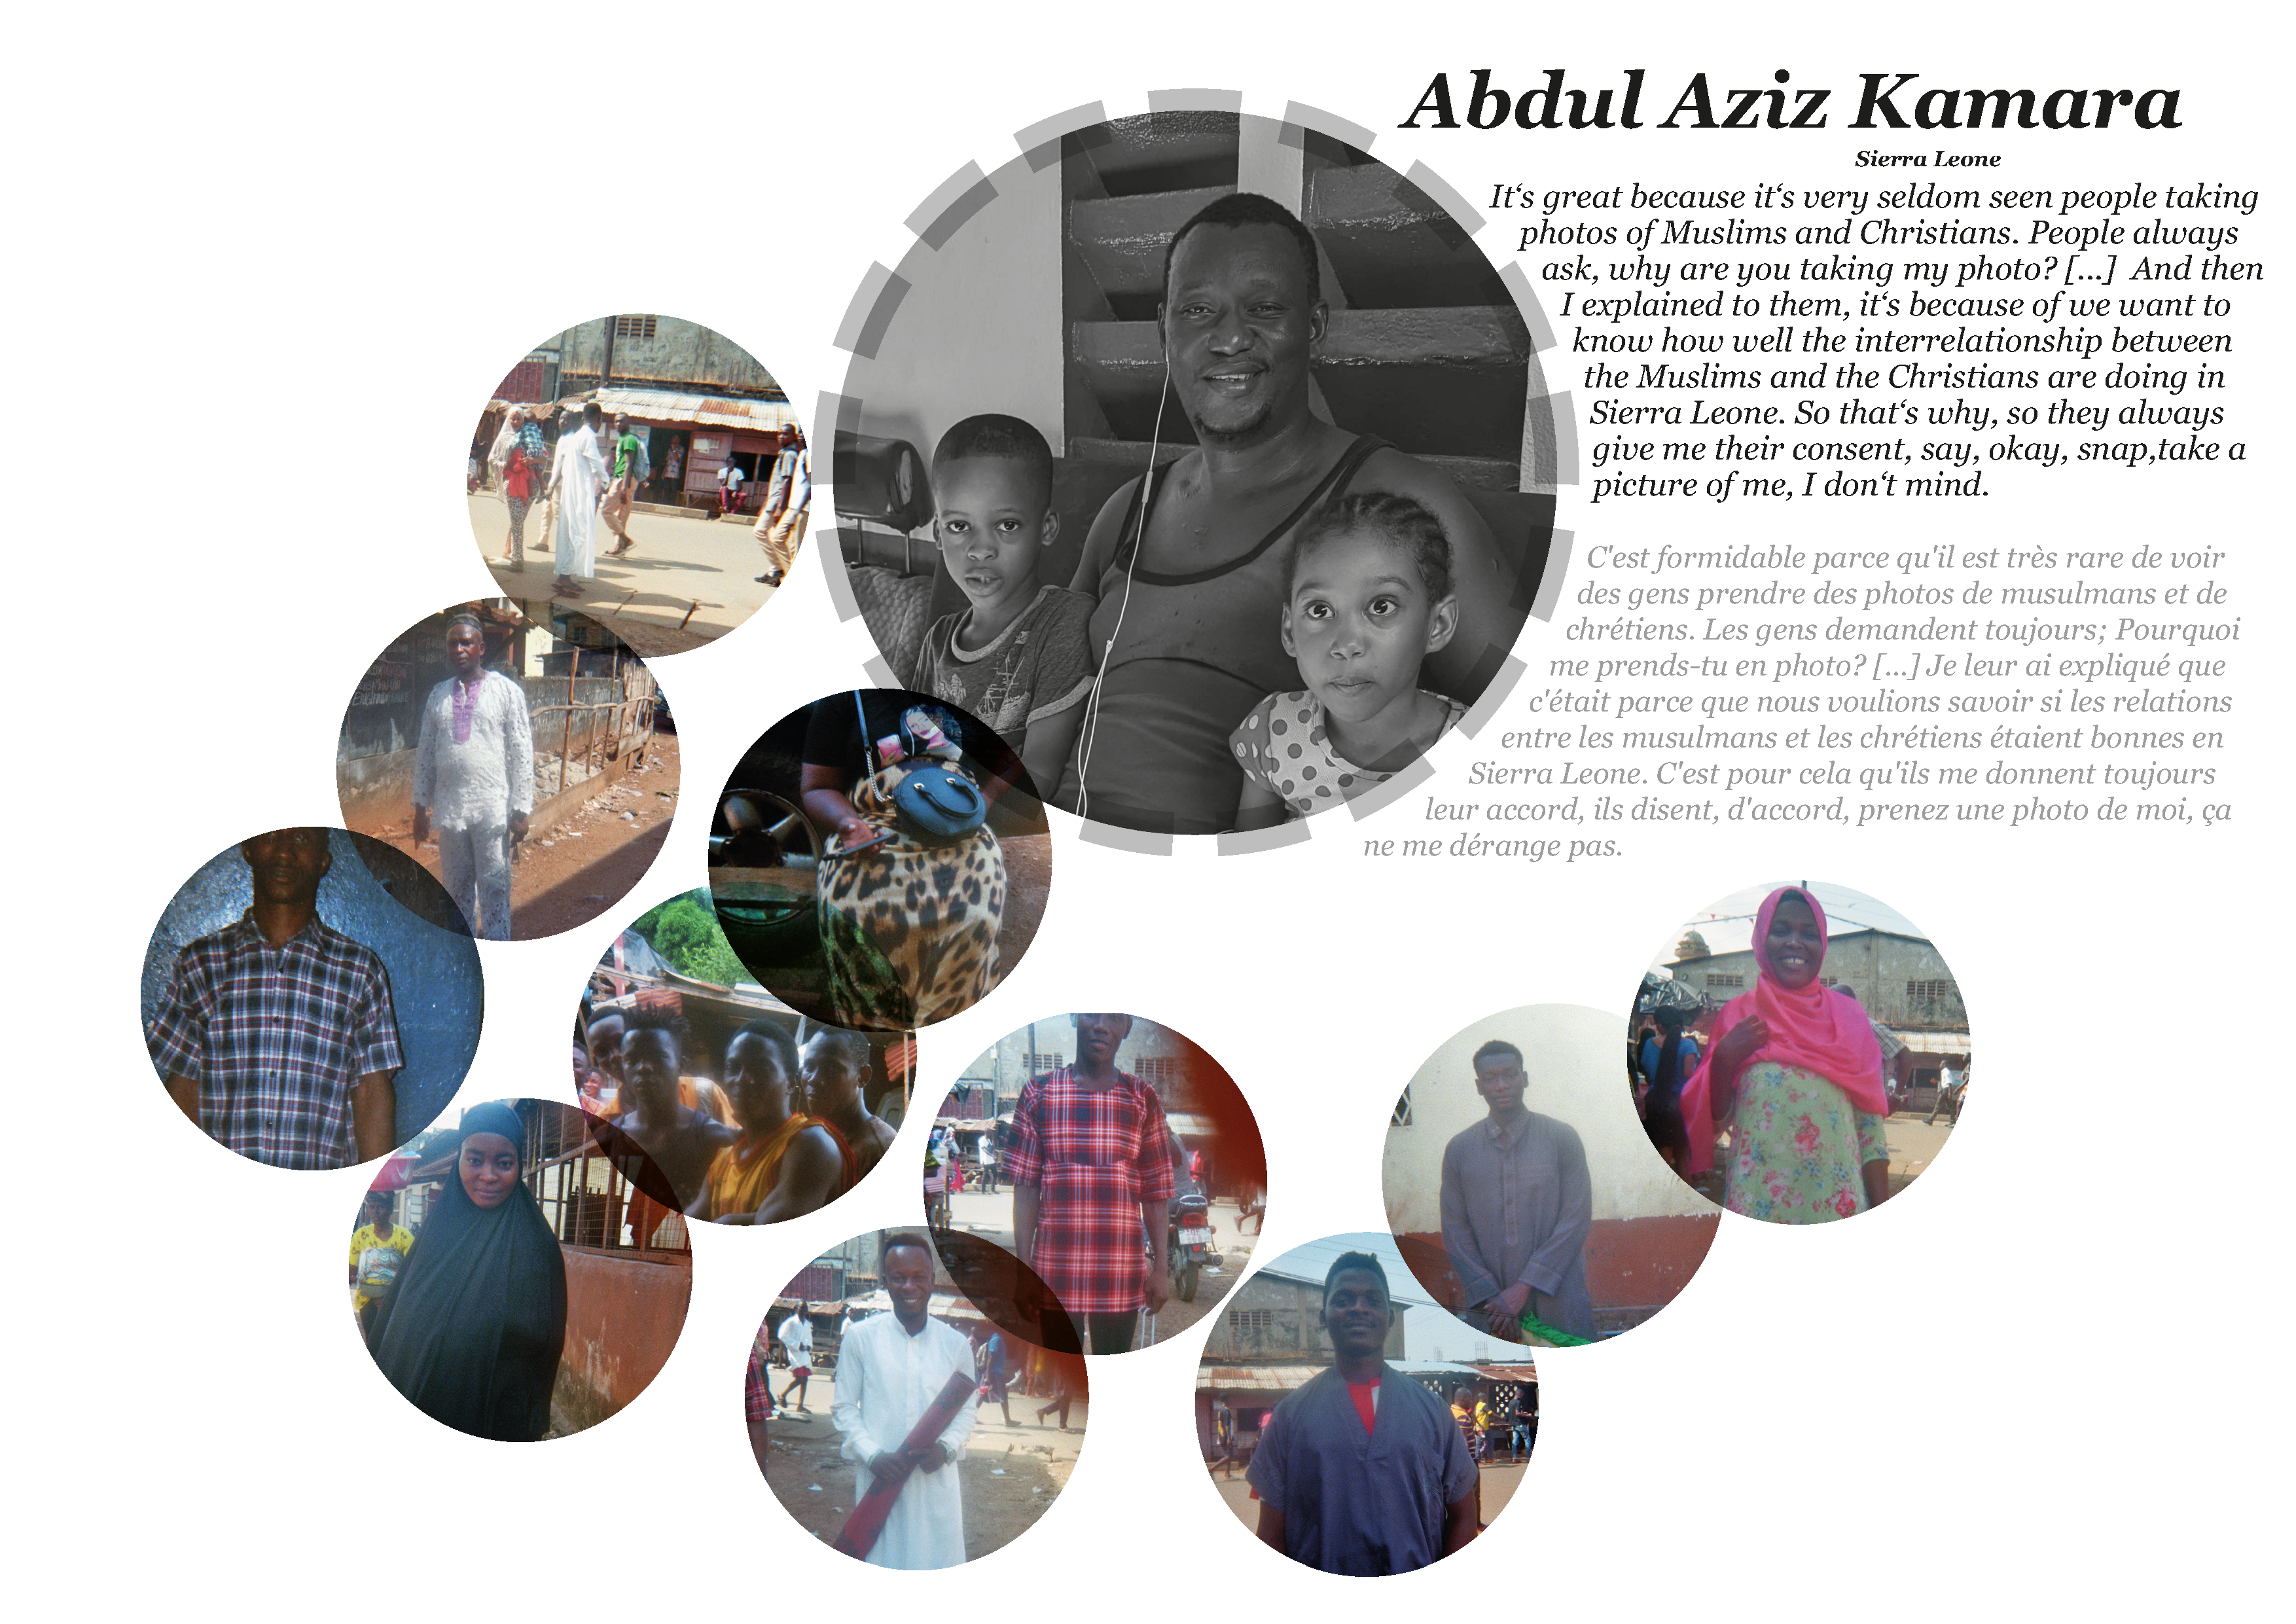 Collage of pictures of religion and peace by Abdul Aziz Kamara in Sierra Leone